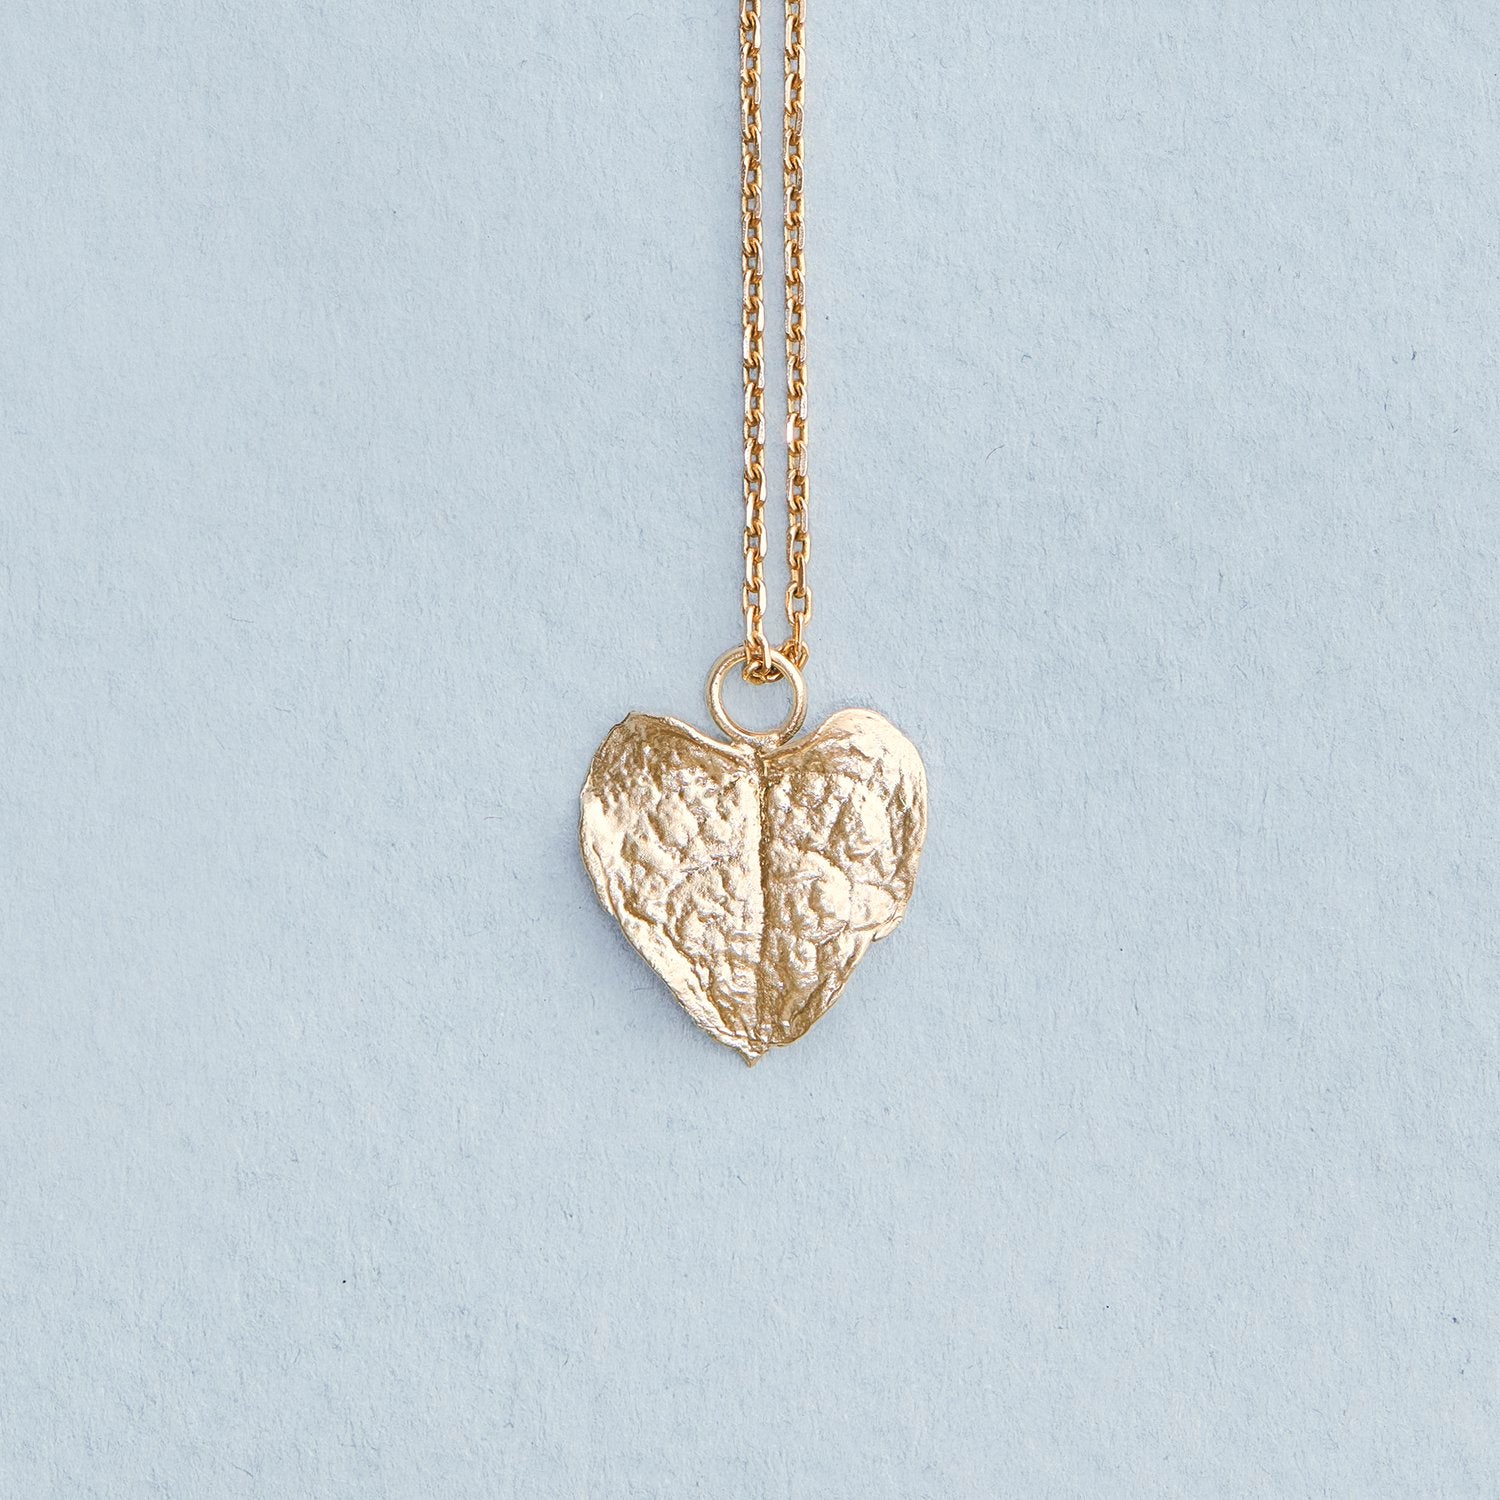 Chain of Hearts Leaf Necklace